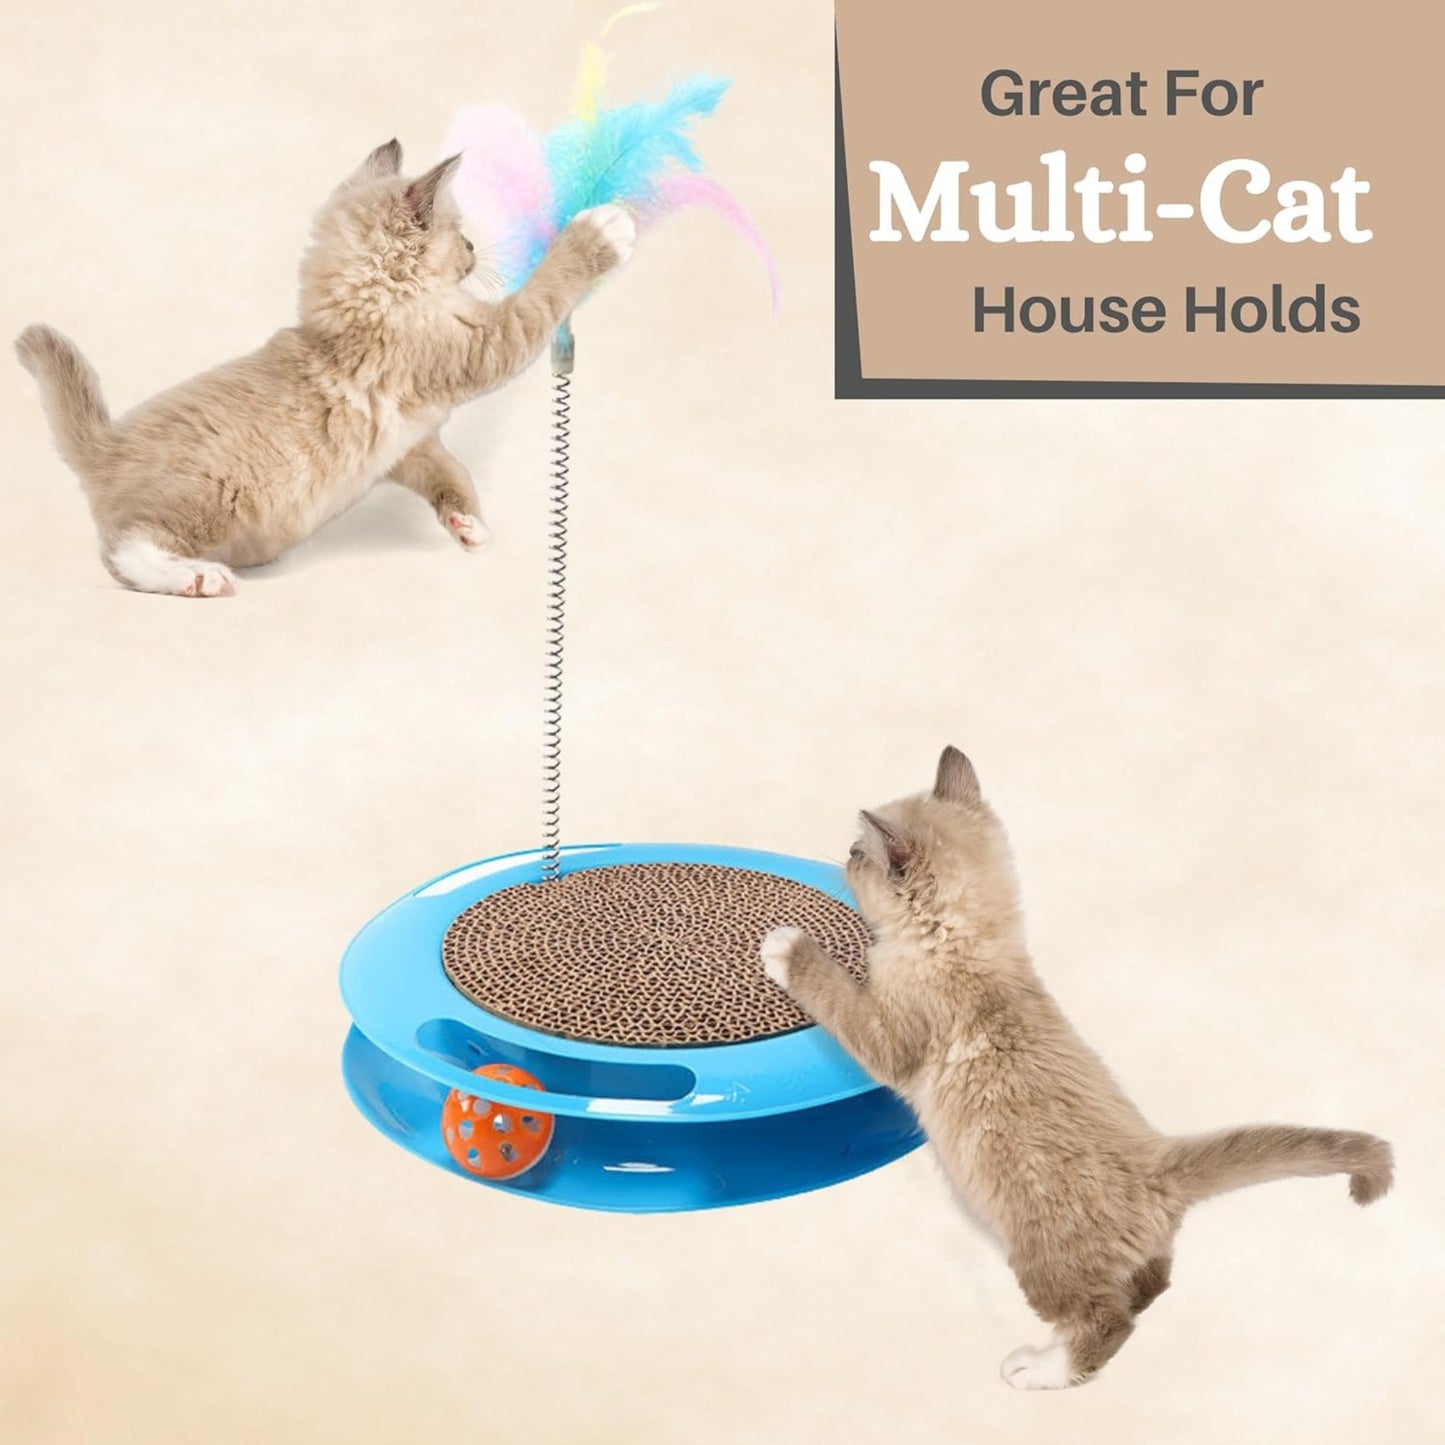 Foodie Puppies Interactive Whirl N Scratch Toy for Cats & Kittens